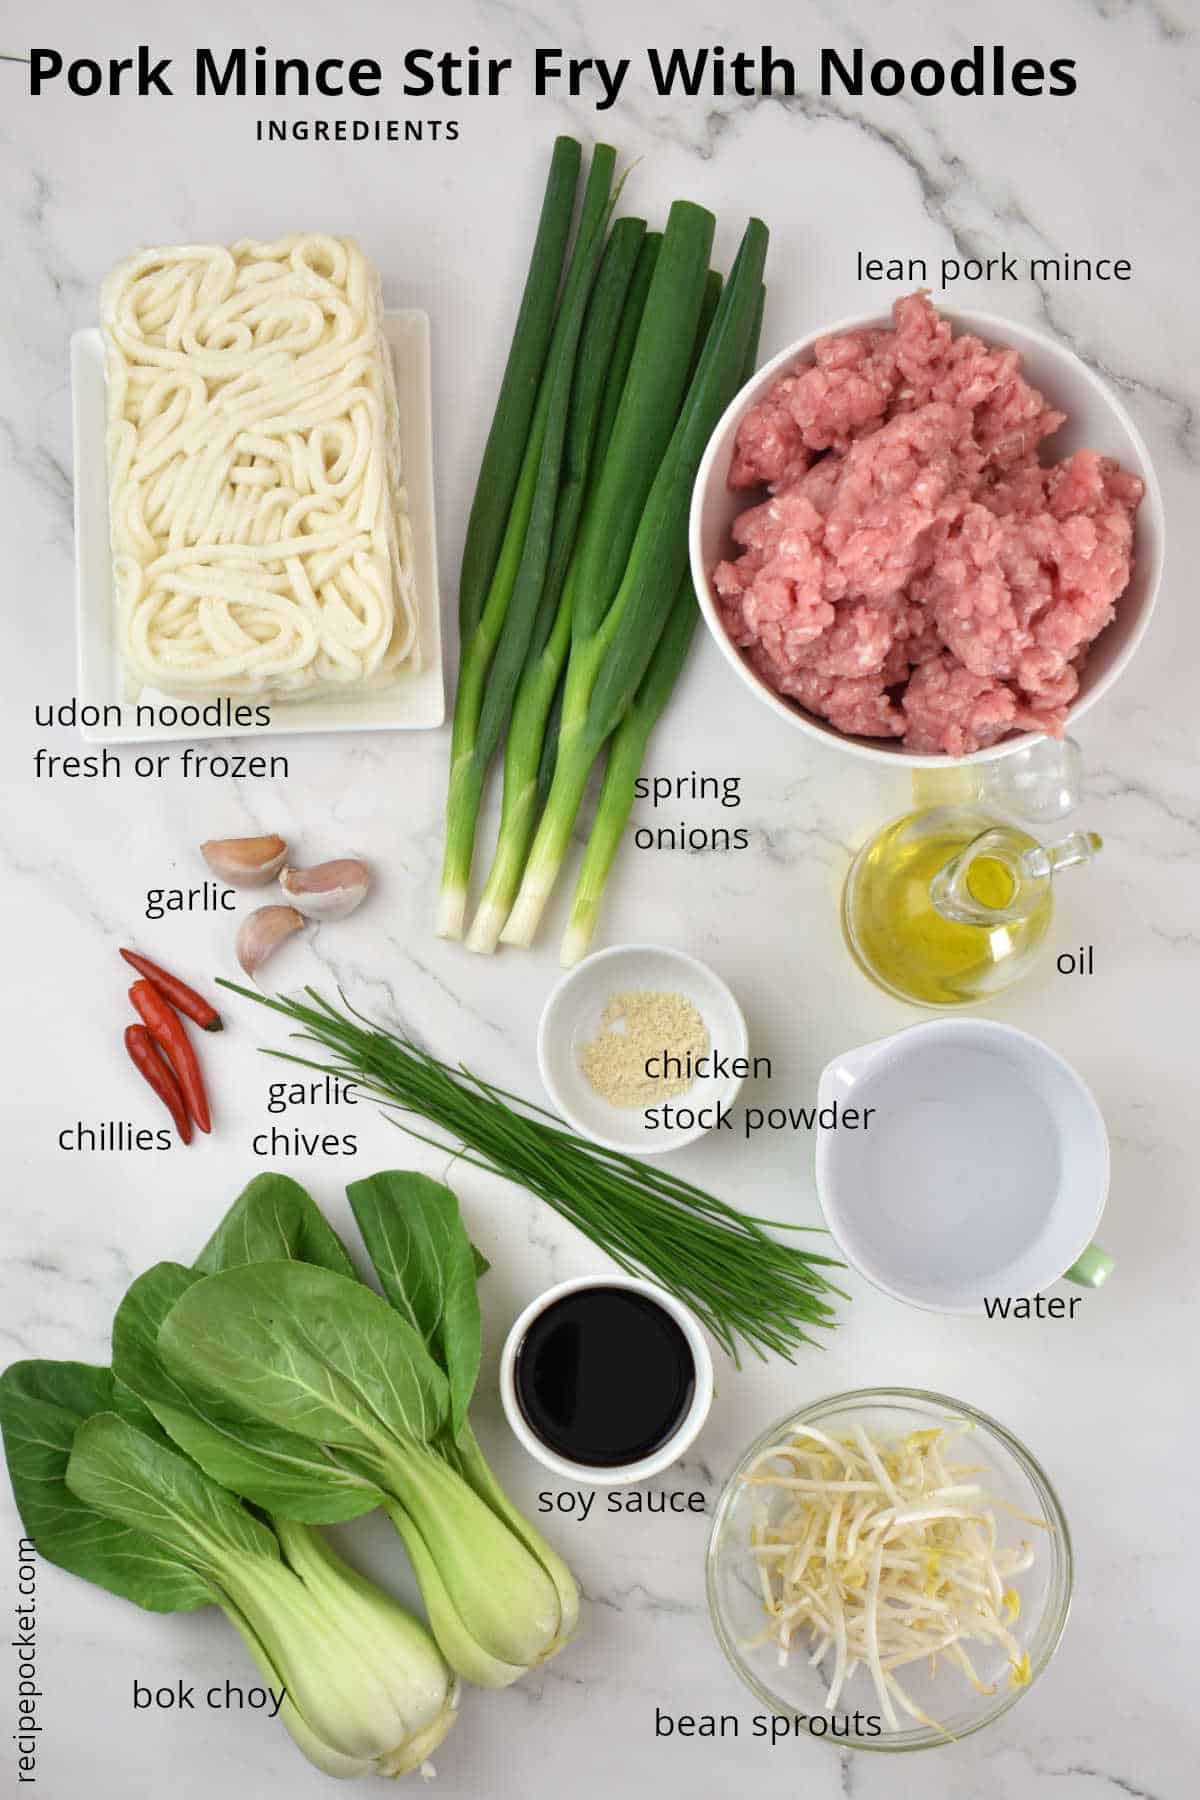 Image showing the ingredients need to make pork mince stir fry.